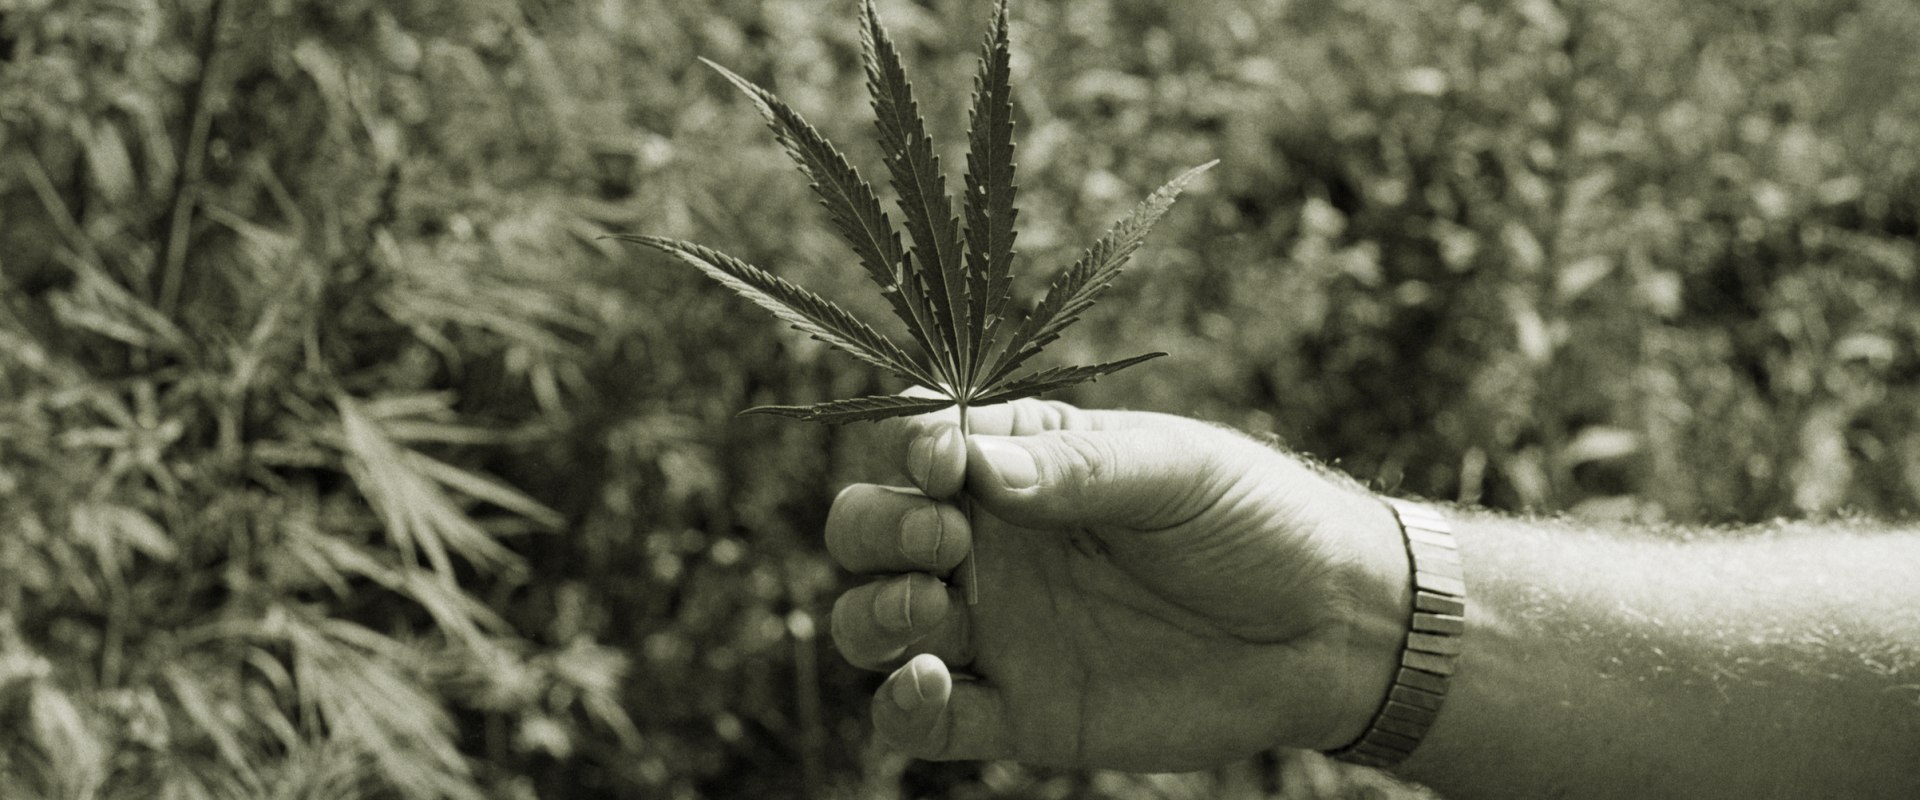 The History of Hemp Prohibition in the United States